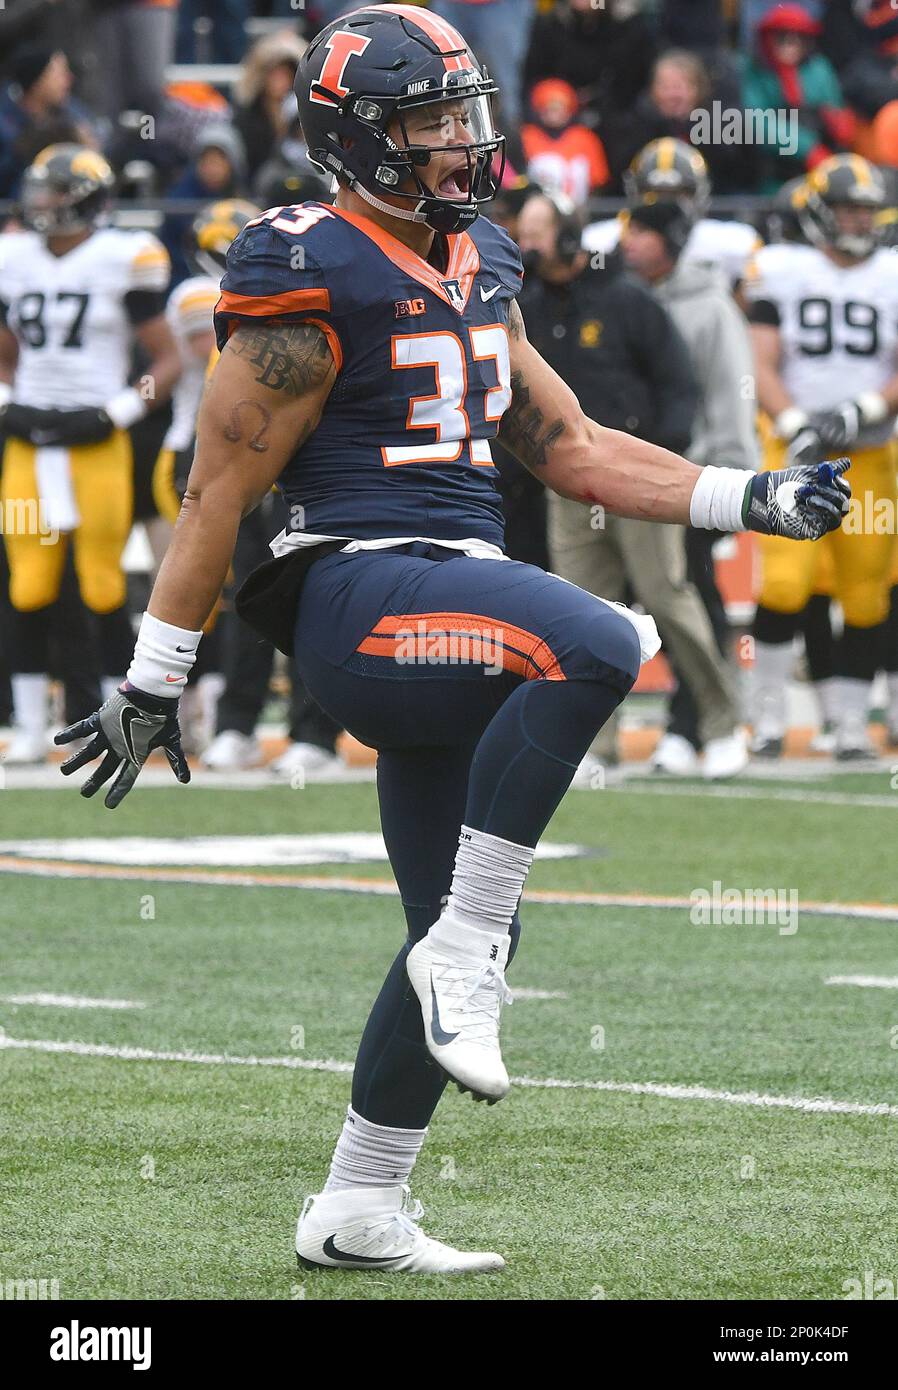 champaign-il-november-19-illinois-linebacker-tre-watson-33-celebrates-after-a-fumble-recovery-during-a-big-ten-conference-football-game-between-the-university-of-iowa-hawkeyes-and-the-university-of-illinois-fighting-illini-on-november-19-2016-at-memorial-stadium-in-champaign-il-photo-by-keith-gilletticon-sportswire-icon-sportswire-via-ap-images-2P0K4DF.jpg